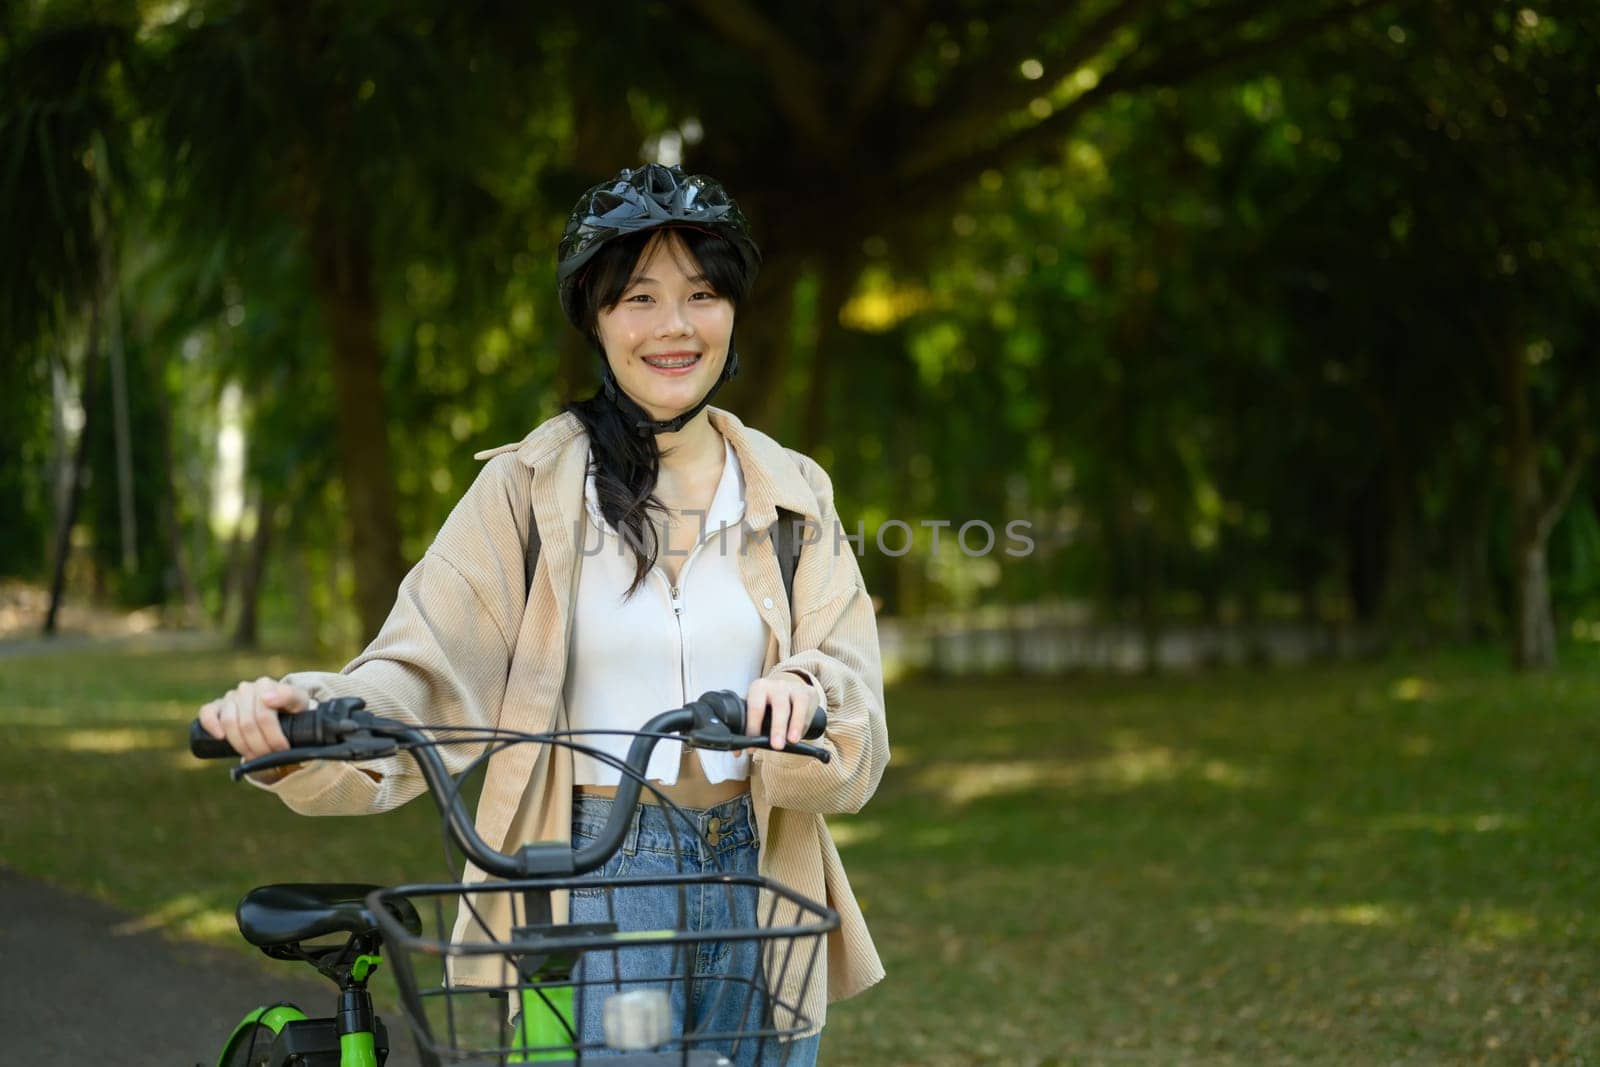 Smiling young woman in helmet walking with bicycle in city park on beautiful spring day.